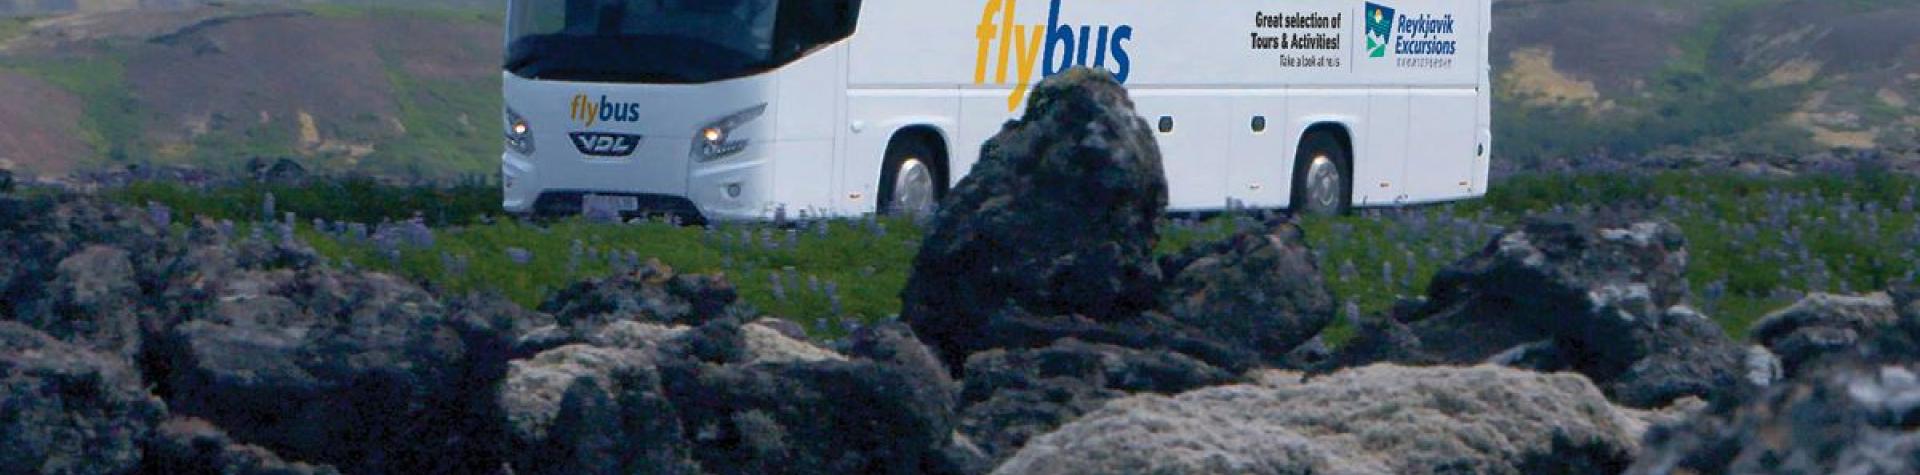 Flybus - Airport to BSI